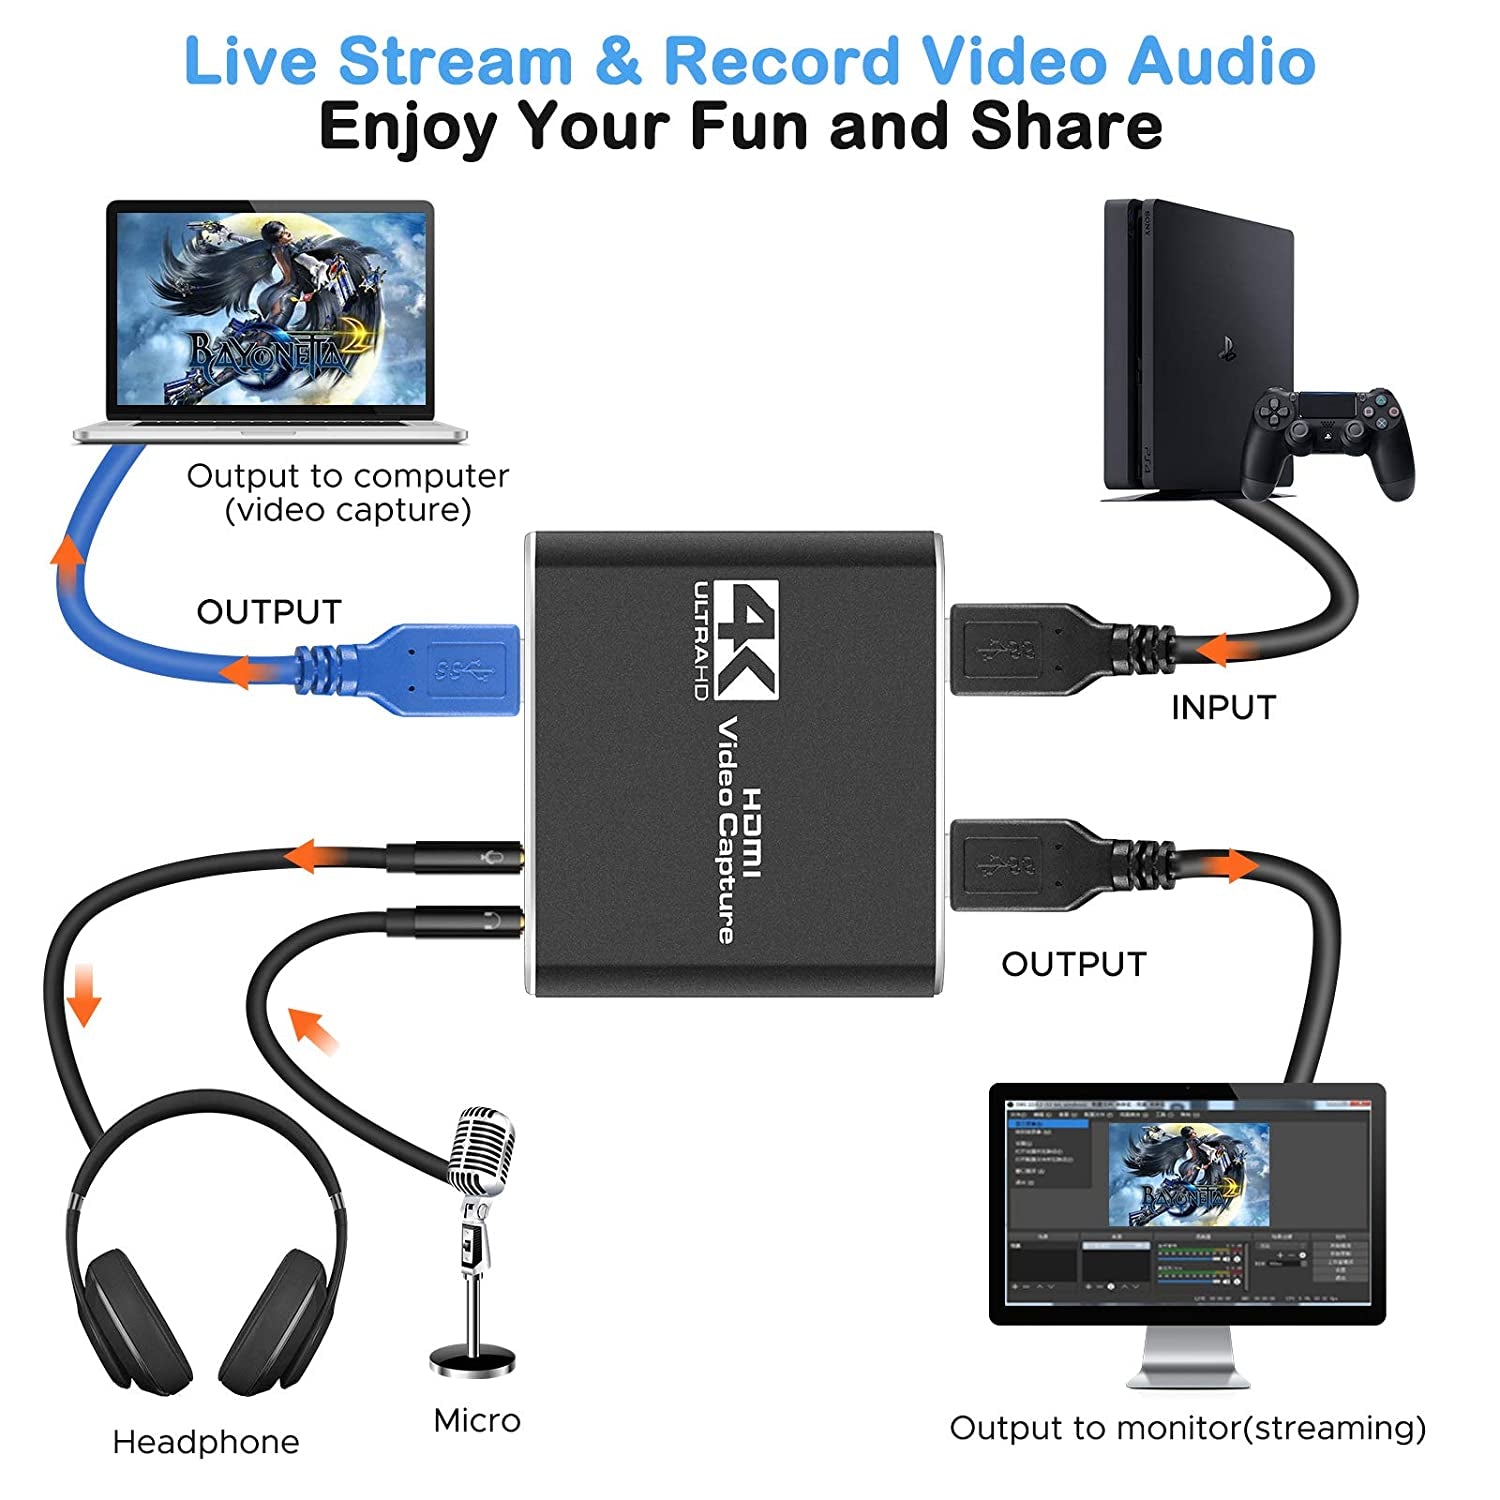 Audio Video Capture Card with Microphone, 4K HDMI Loop-Out and 1080P 60Fps Video Recorder for Gaming, Live Streaming and Video Conferencing, Compatible with Nintendo Switch, PS4, OBS, Cameras and PC